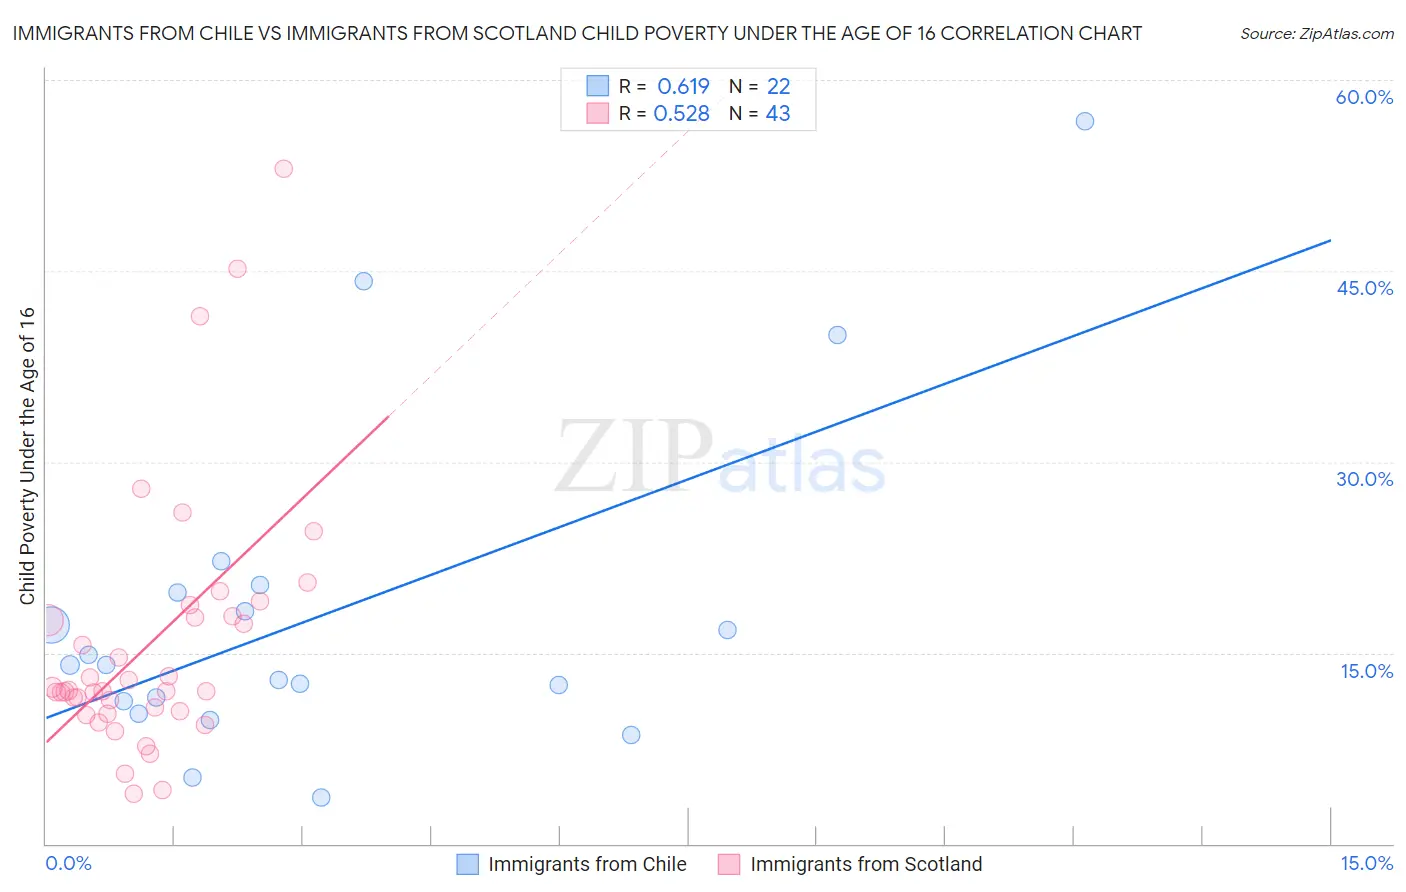 Immigrants from Chile vs Immigrants from Scotland Child Poverty Under the Age of 16